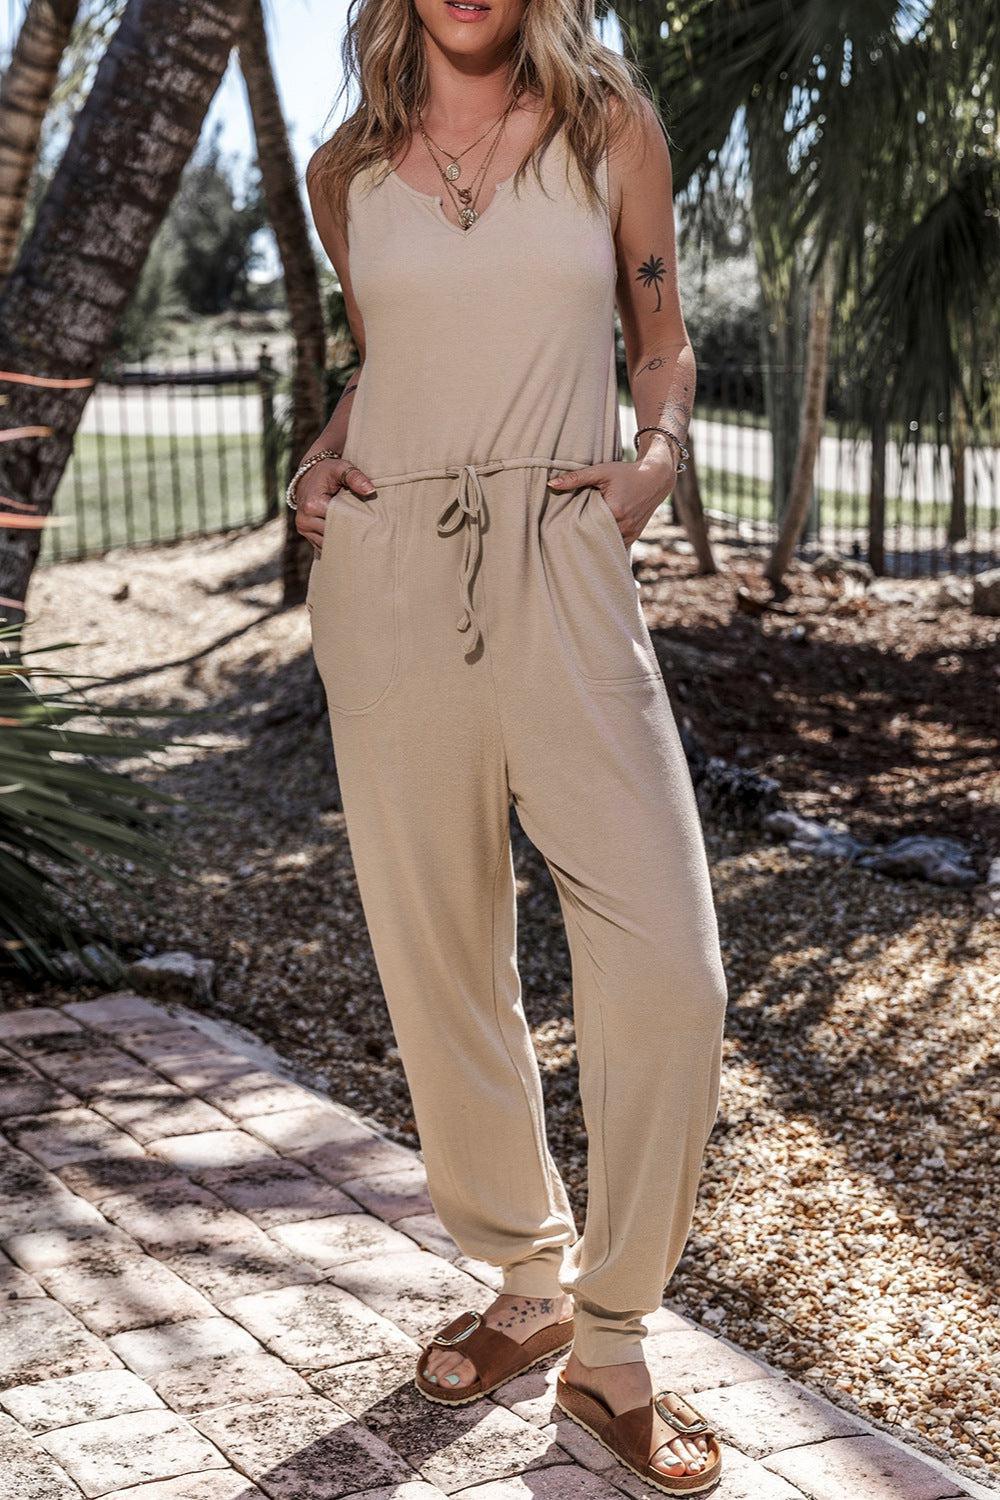 a woman in a tan jumpsuit posing for a picture